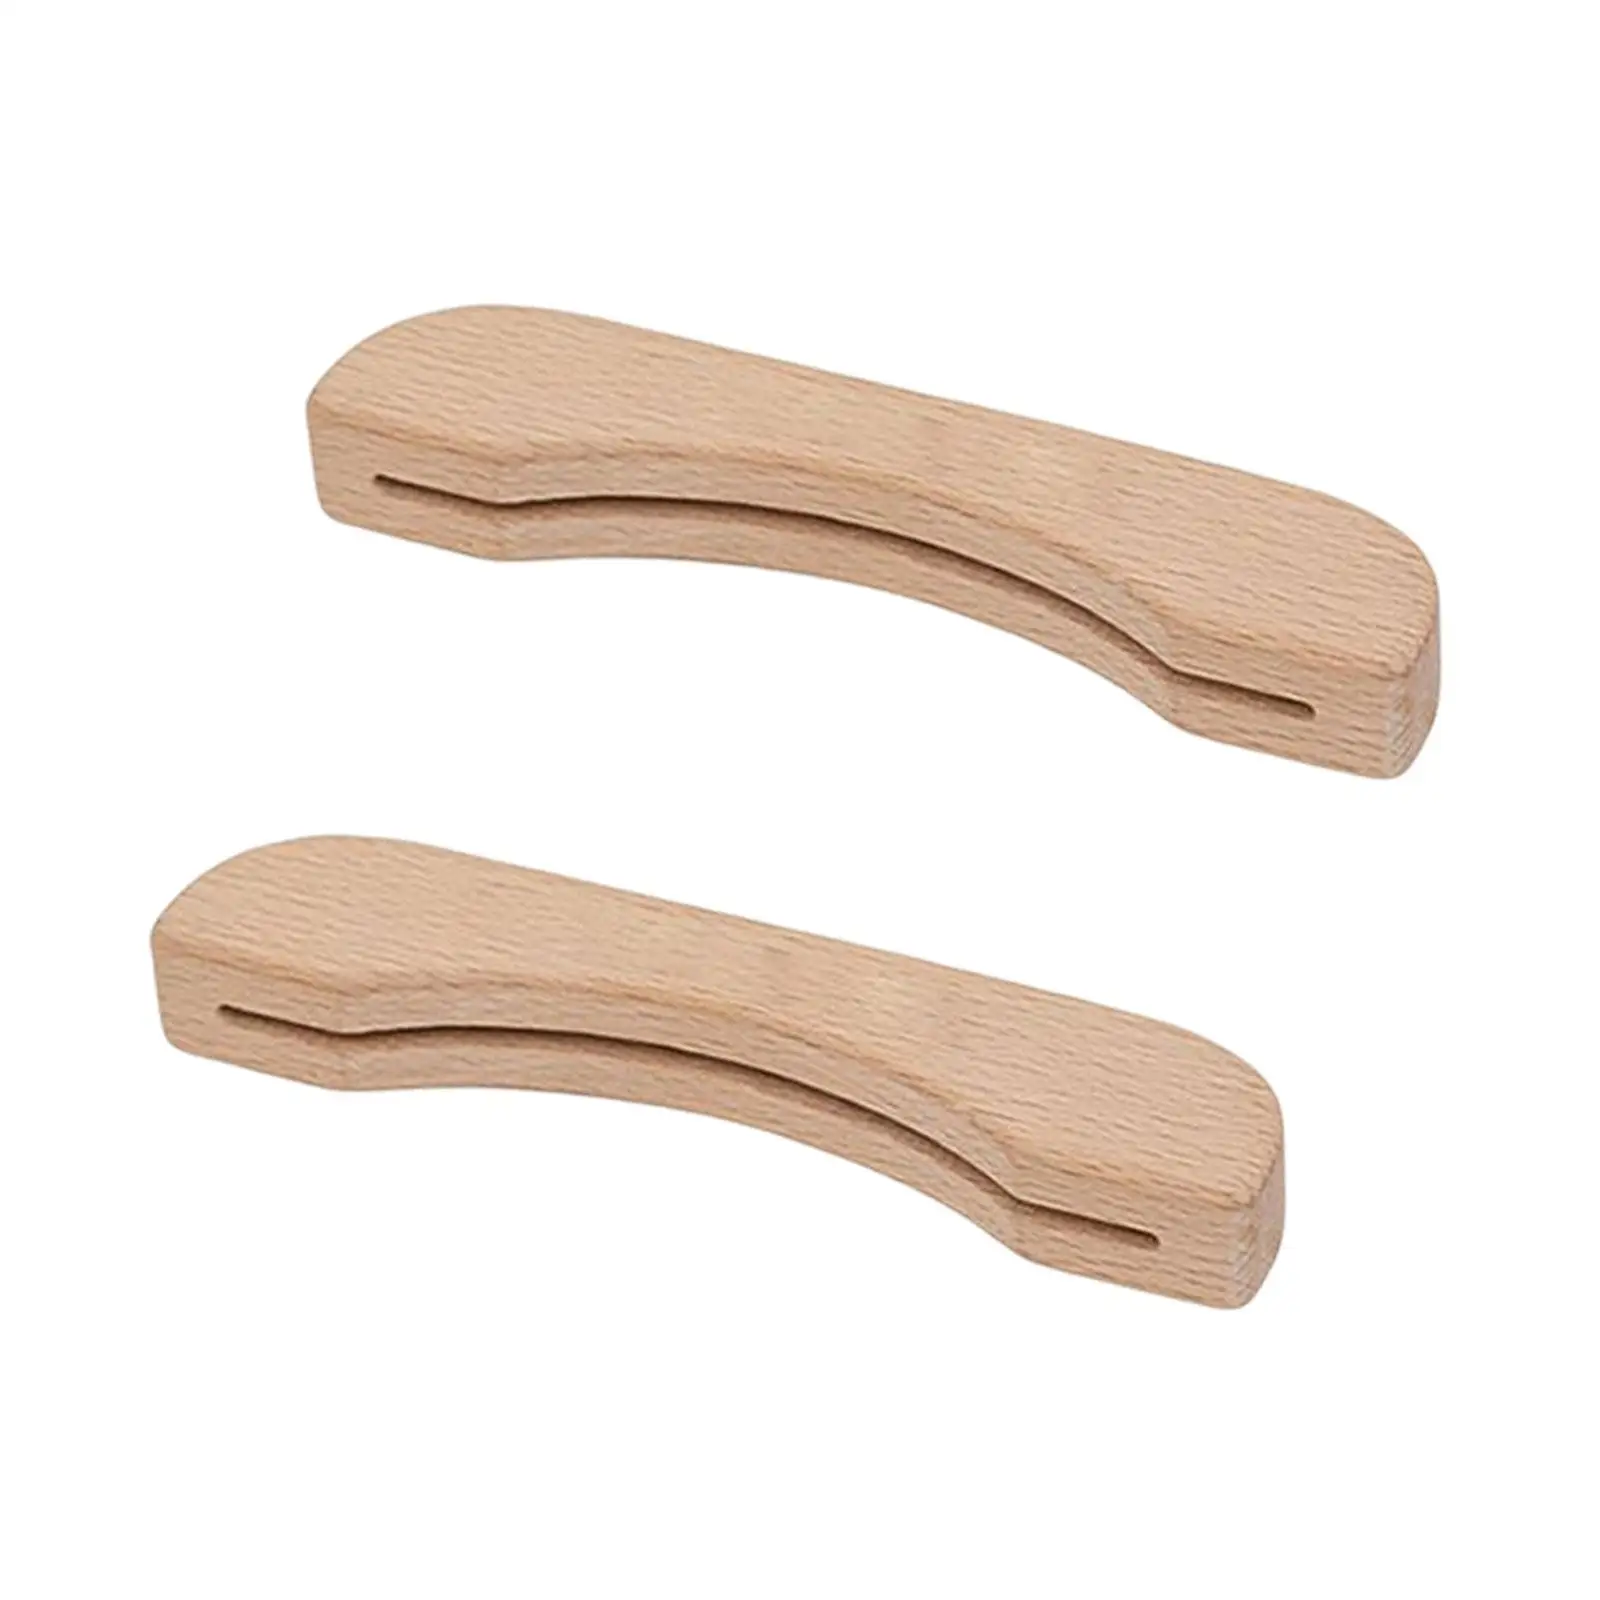 Wooden Barbecue Pan Handle Anti Scalding Insulated Replacement Grip for Sauce